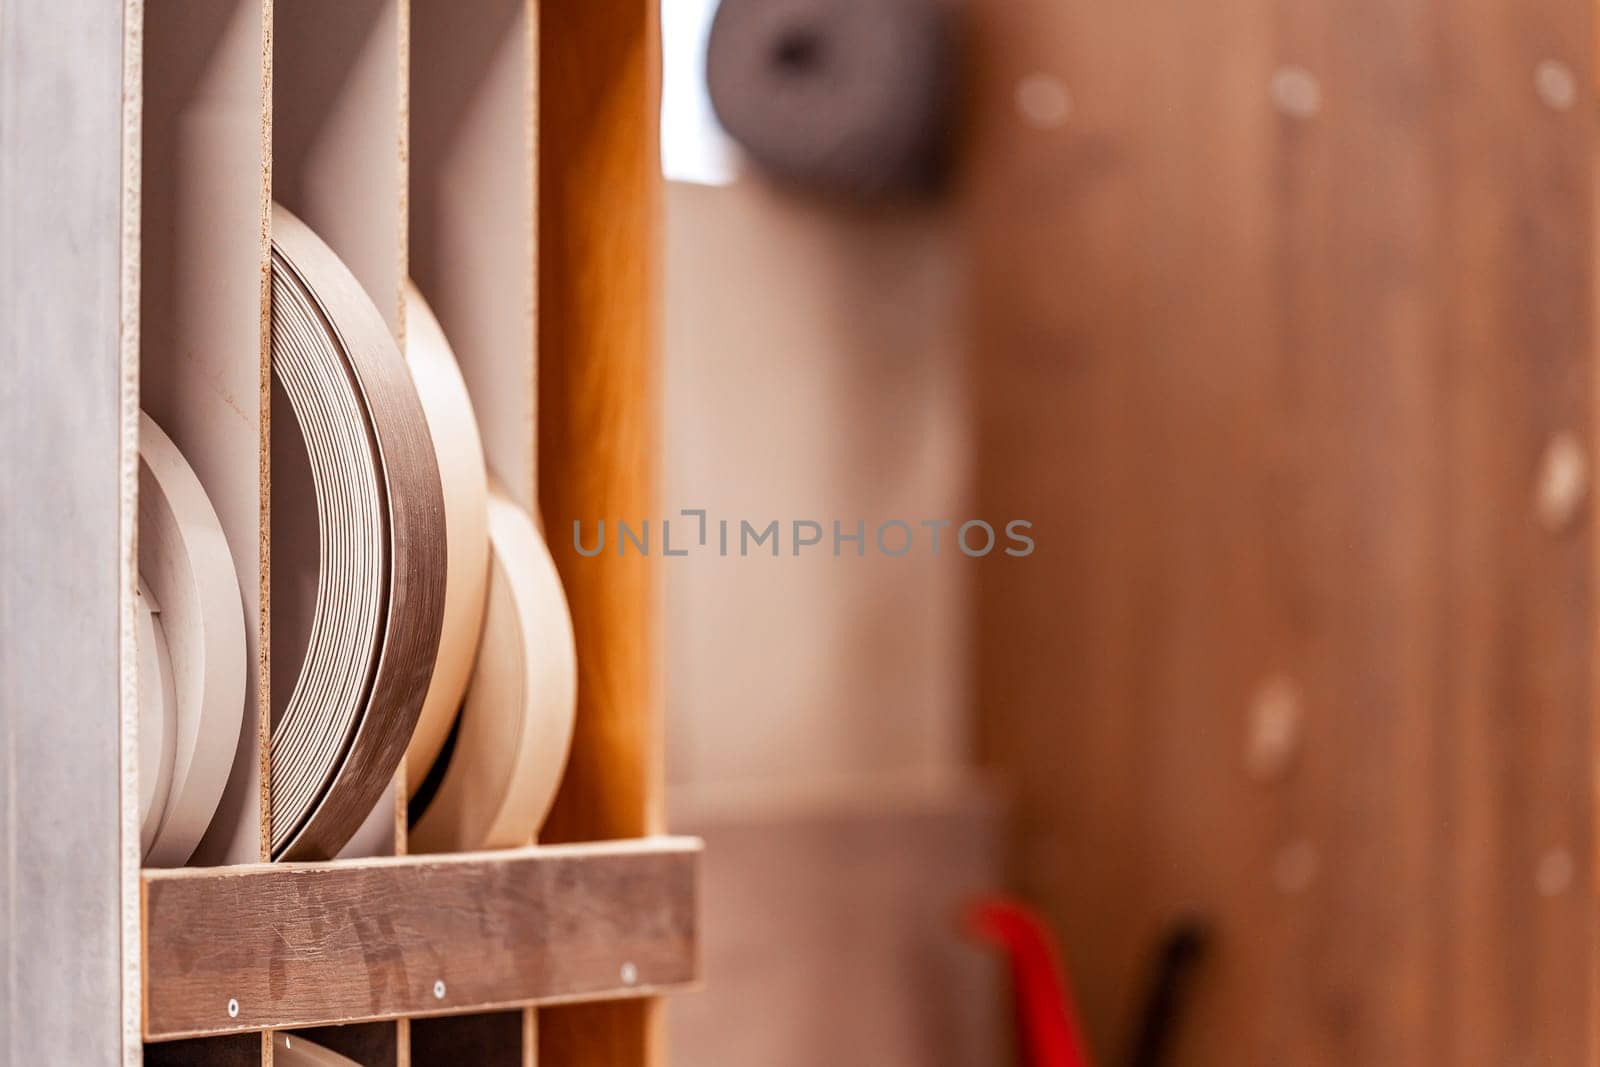 swatch of laminate edges in carpentry by Edophoto